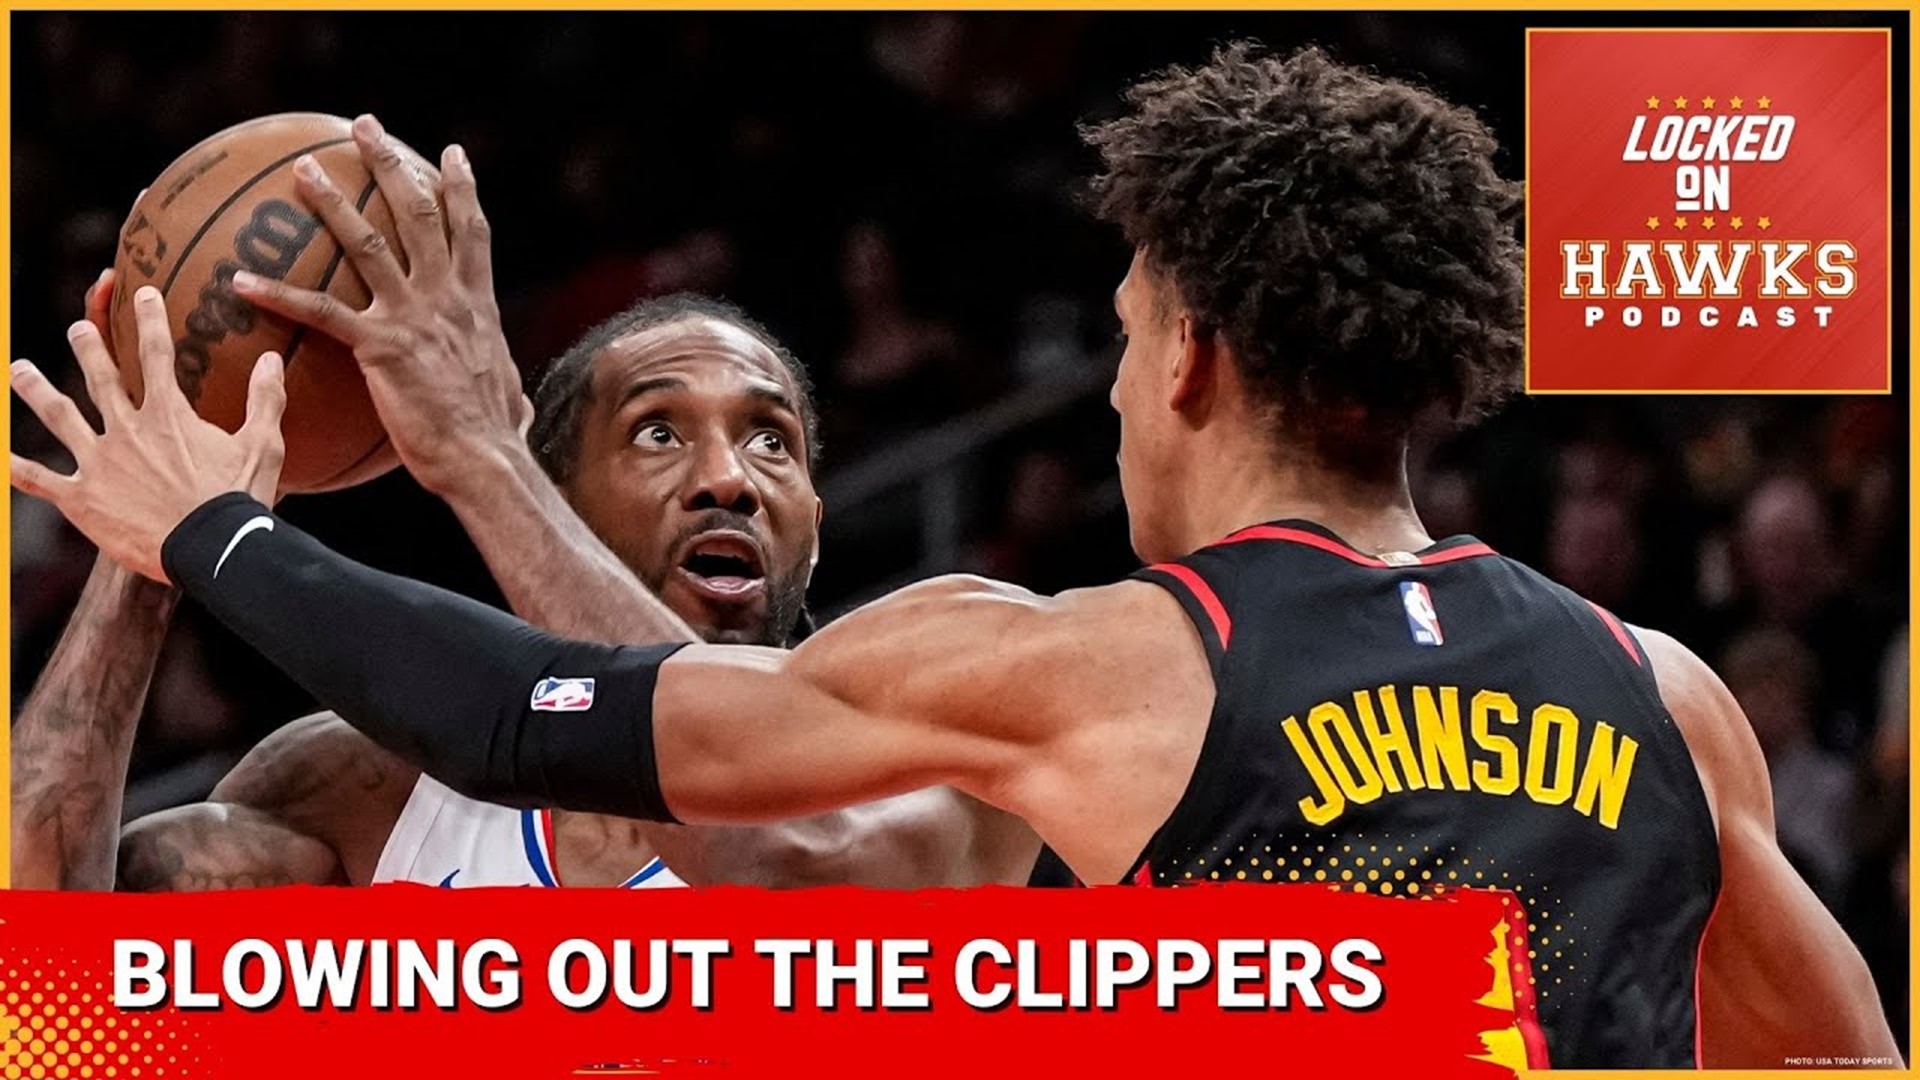 The show breaks down Sunday's game between the Atlanta Hawks and the Los Angeles Clippers, including a very strong defensive performance